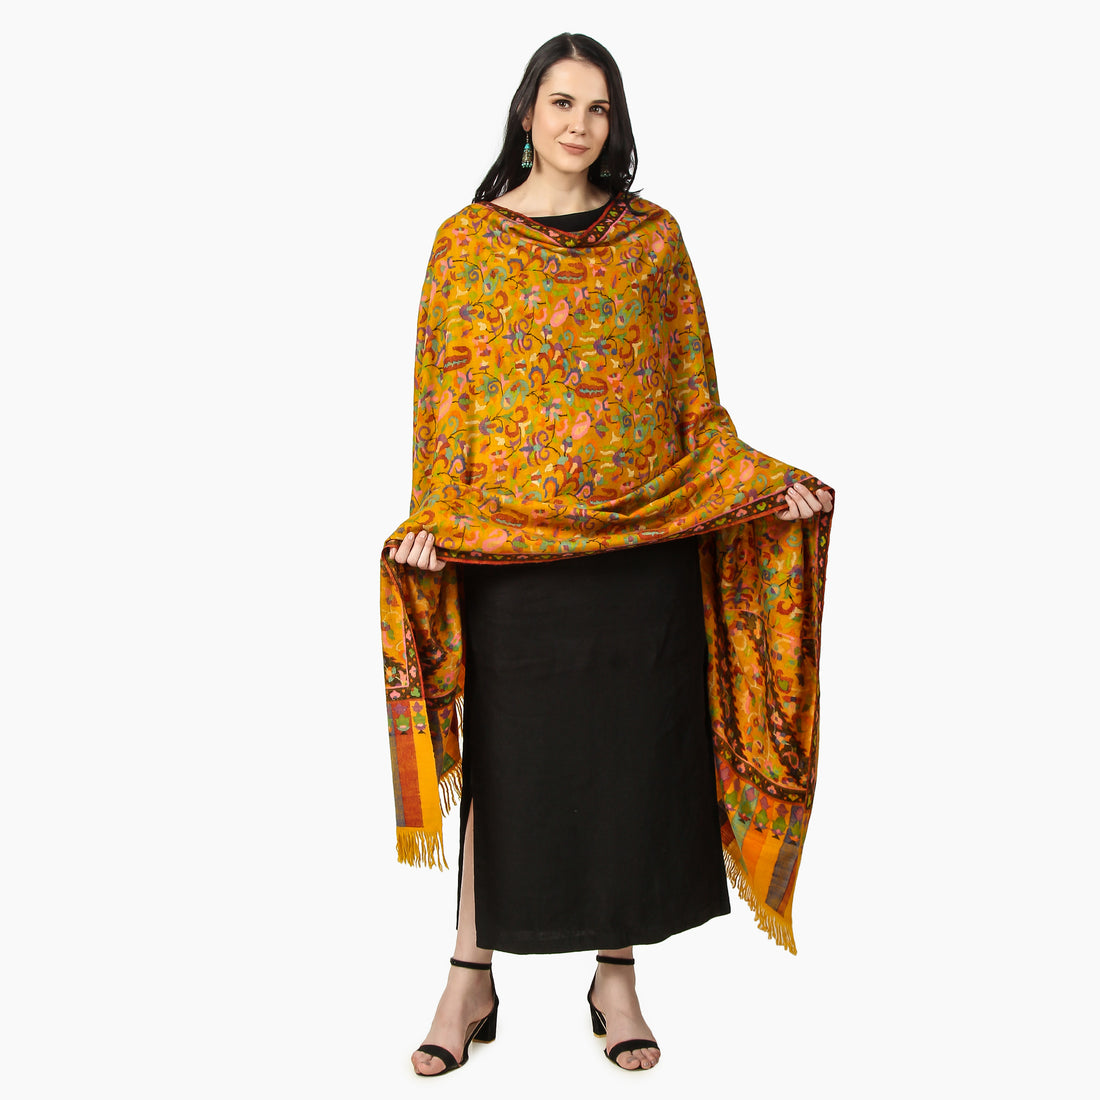 Where can i buy Pashmina Shawls online?